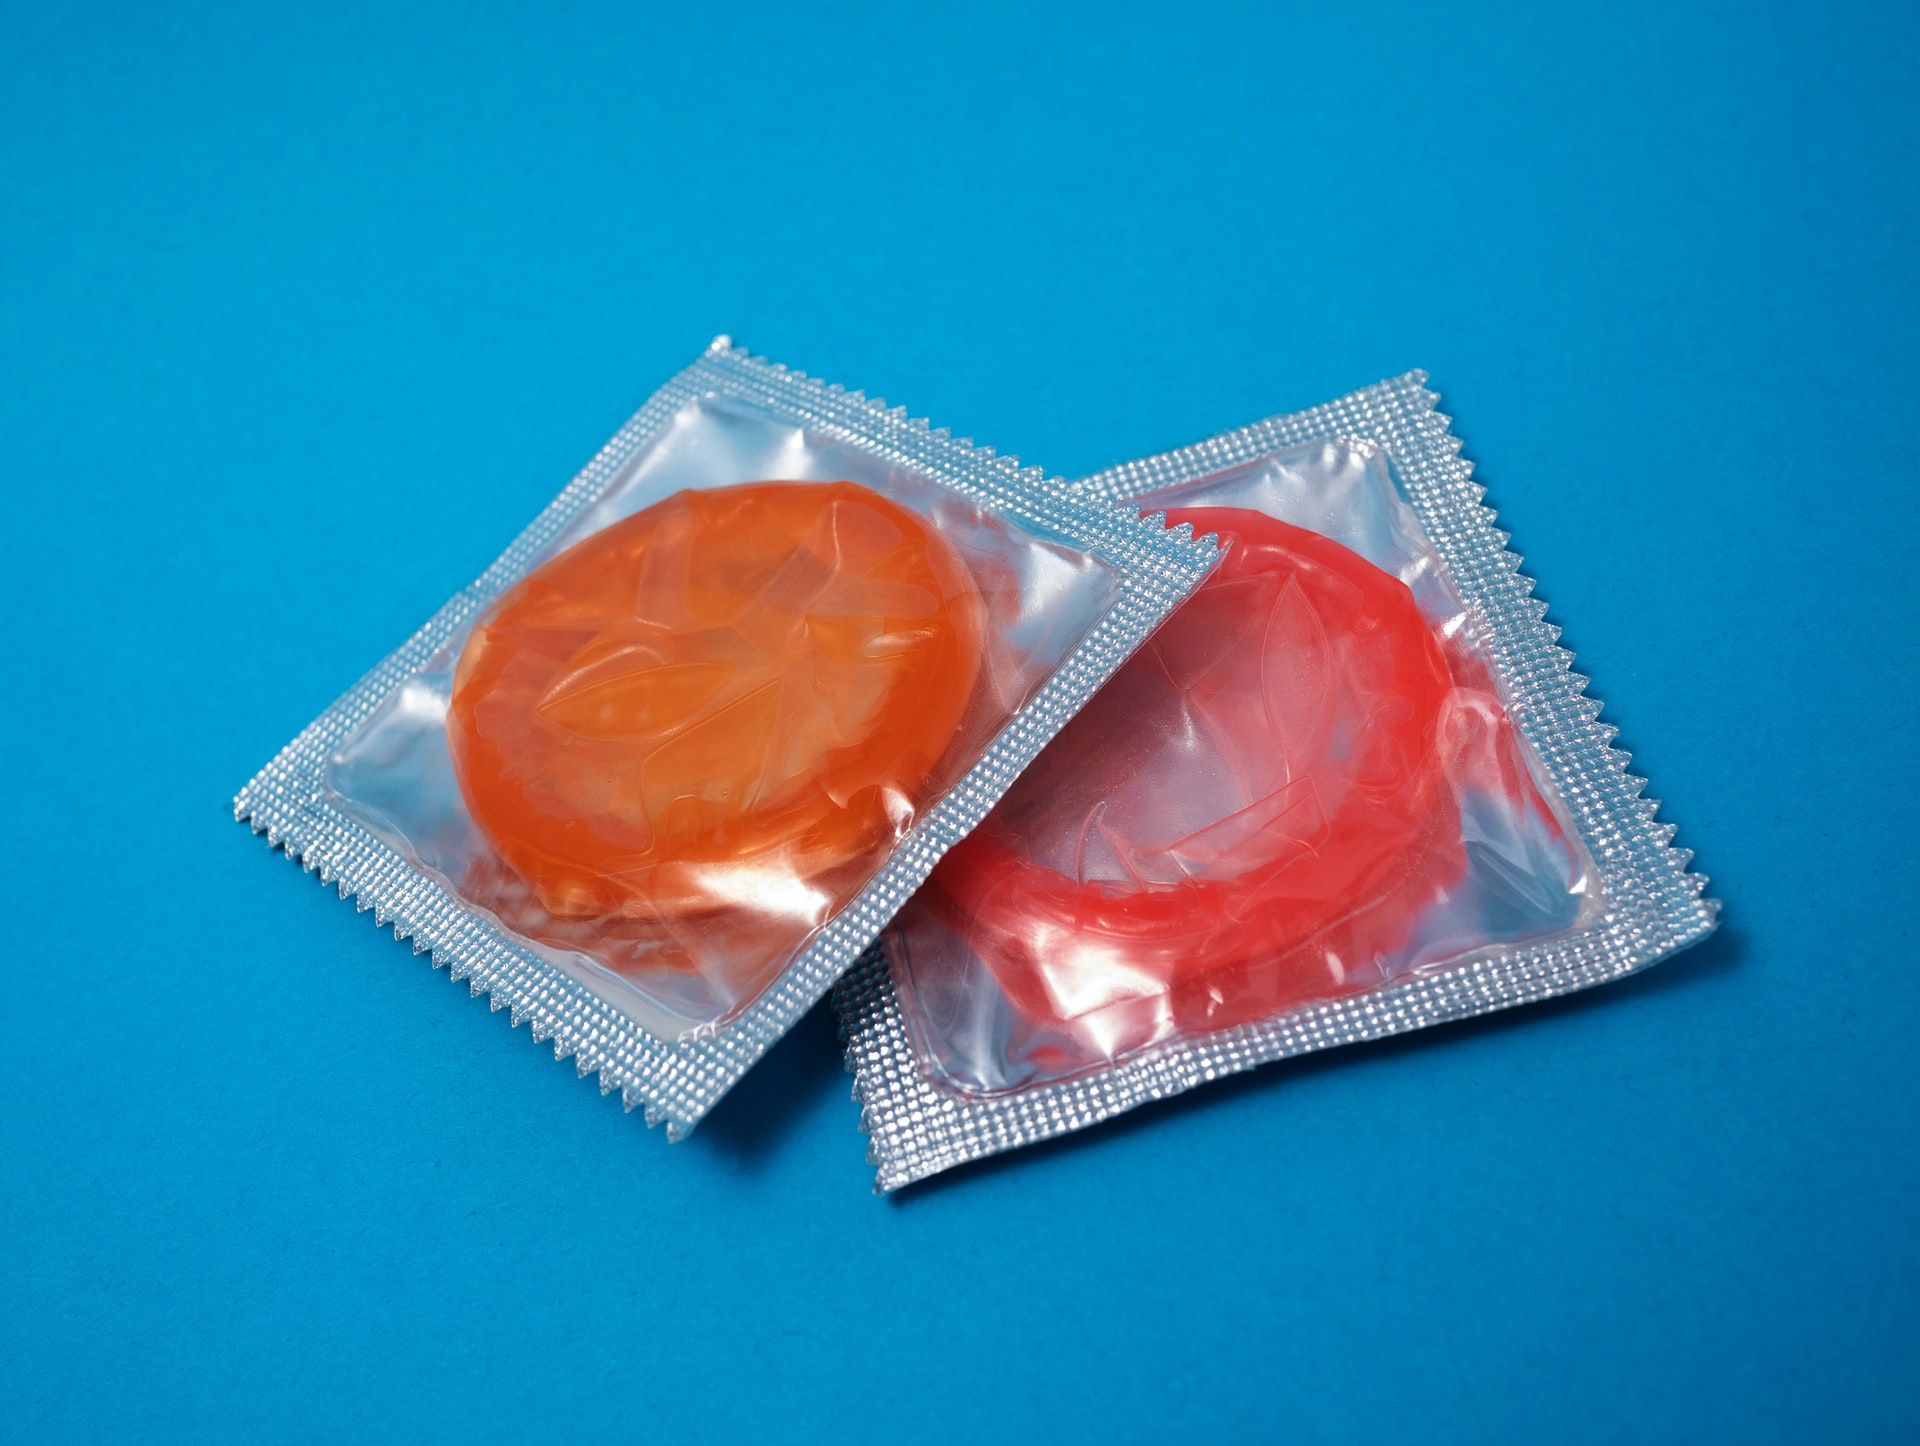 5 Steps to Take If a Condom Breaks